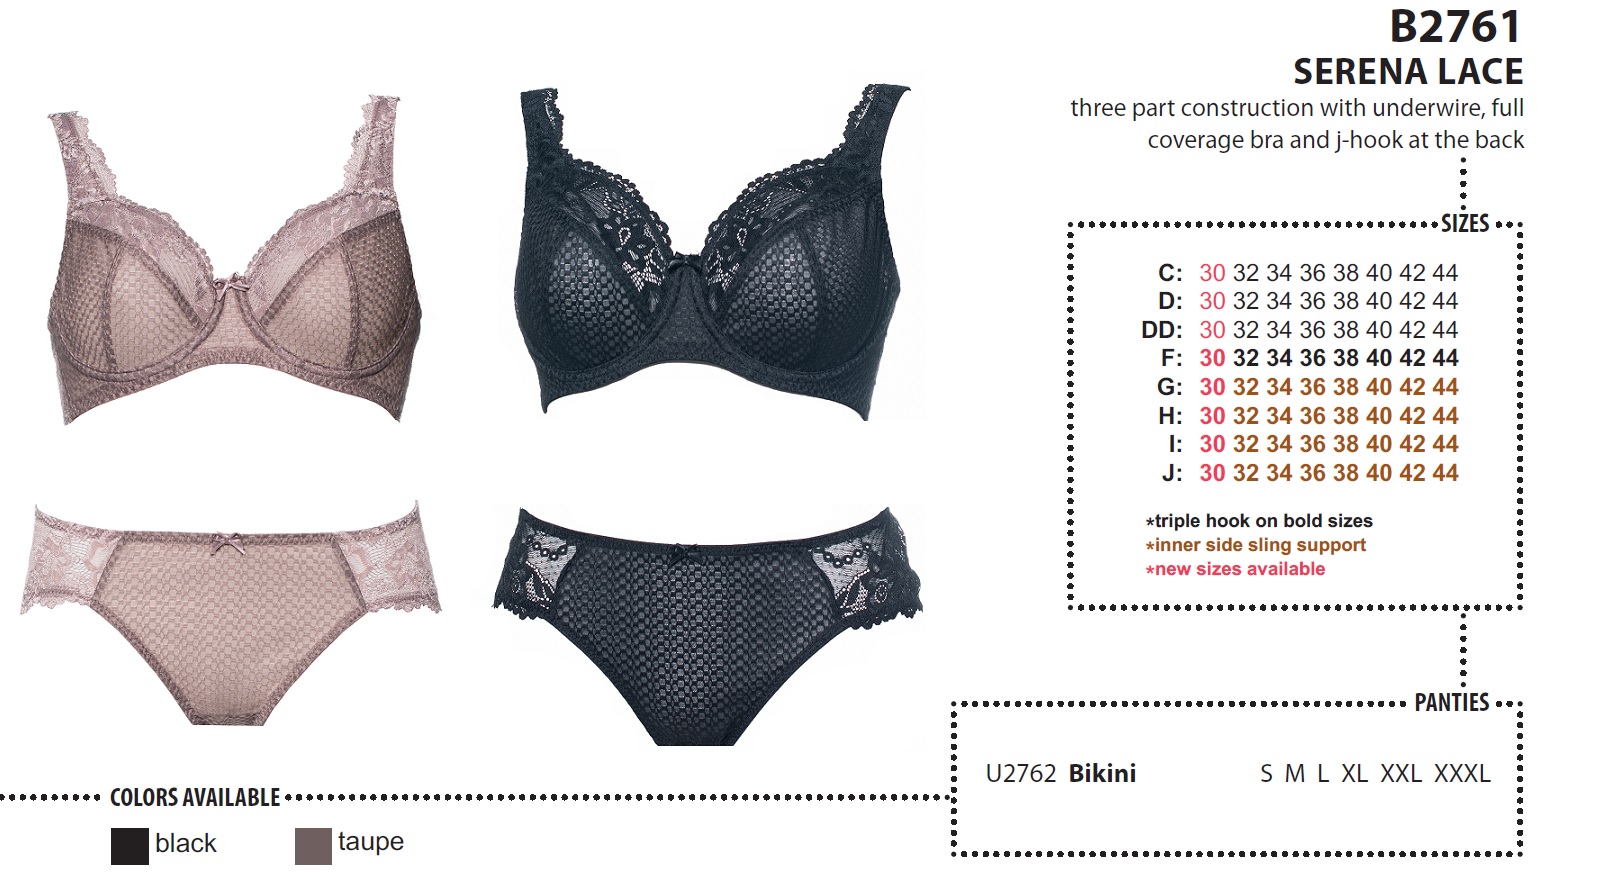 Fit Fully Yours Serena Lace 3-Part Underwire Bra B2761 - Fit Fully Yours 